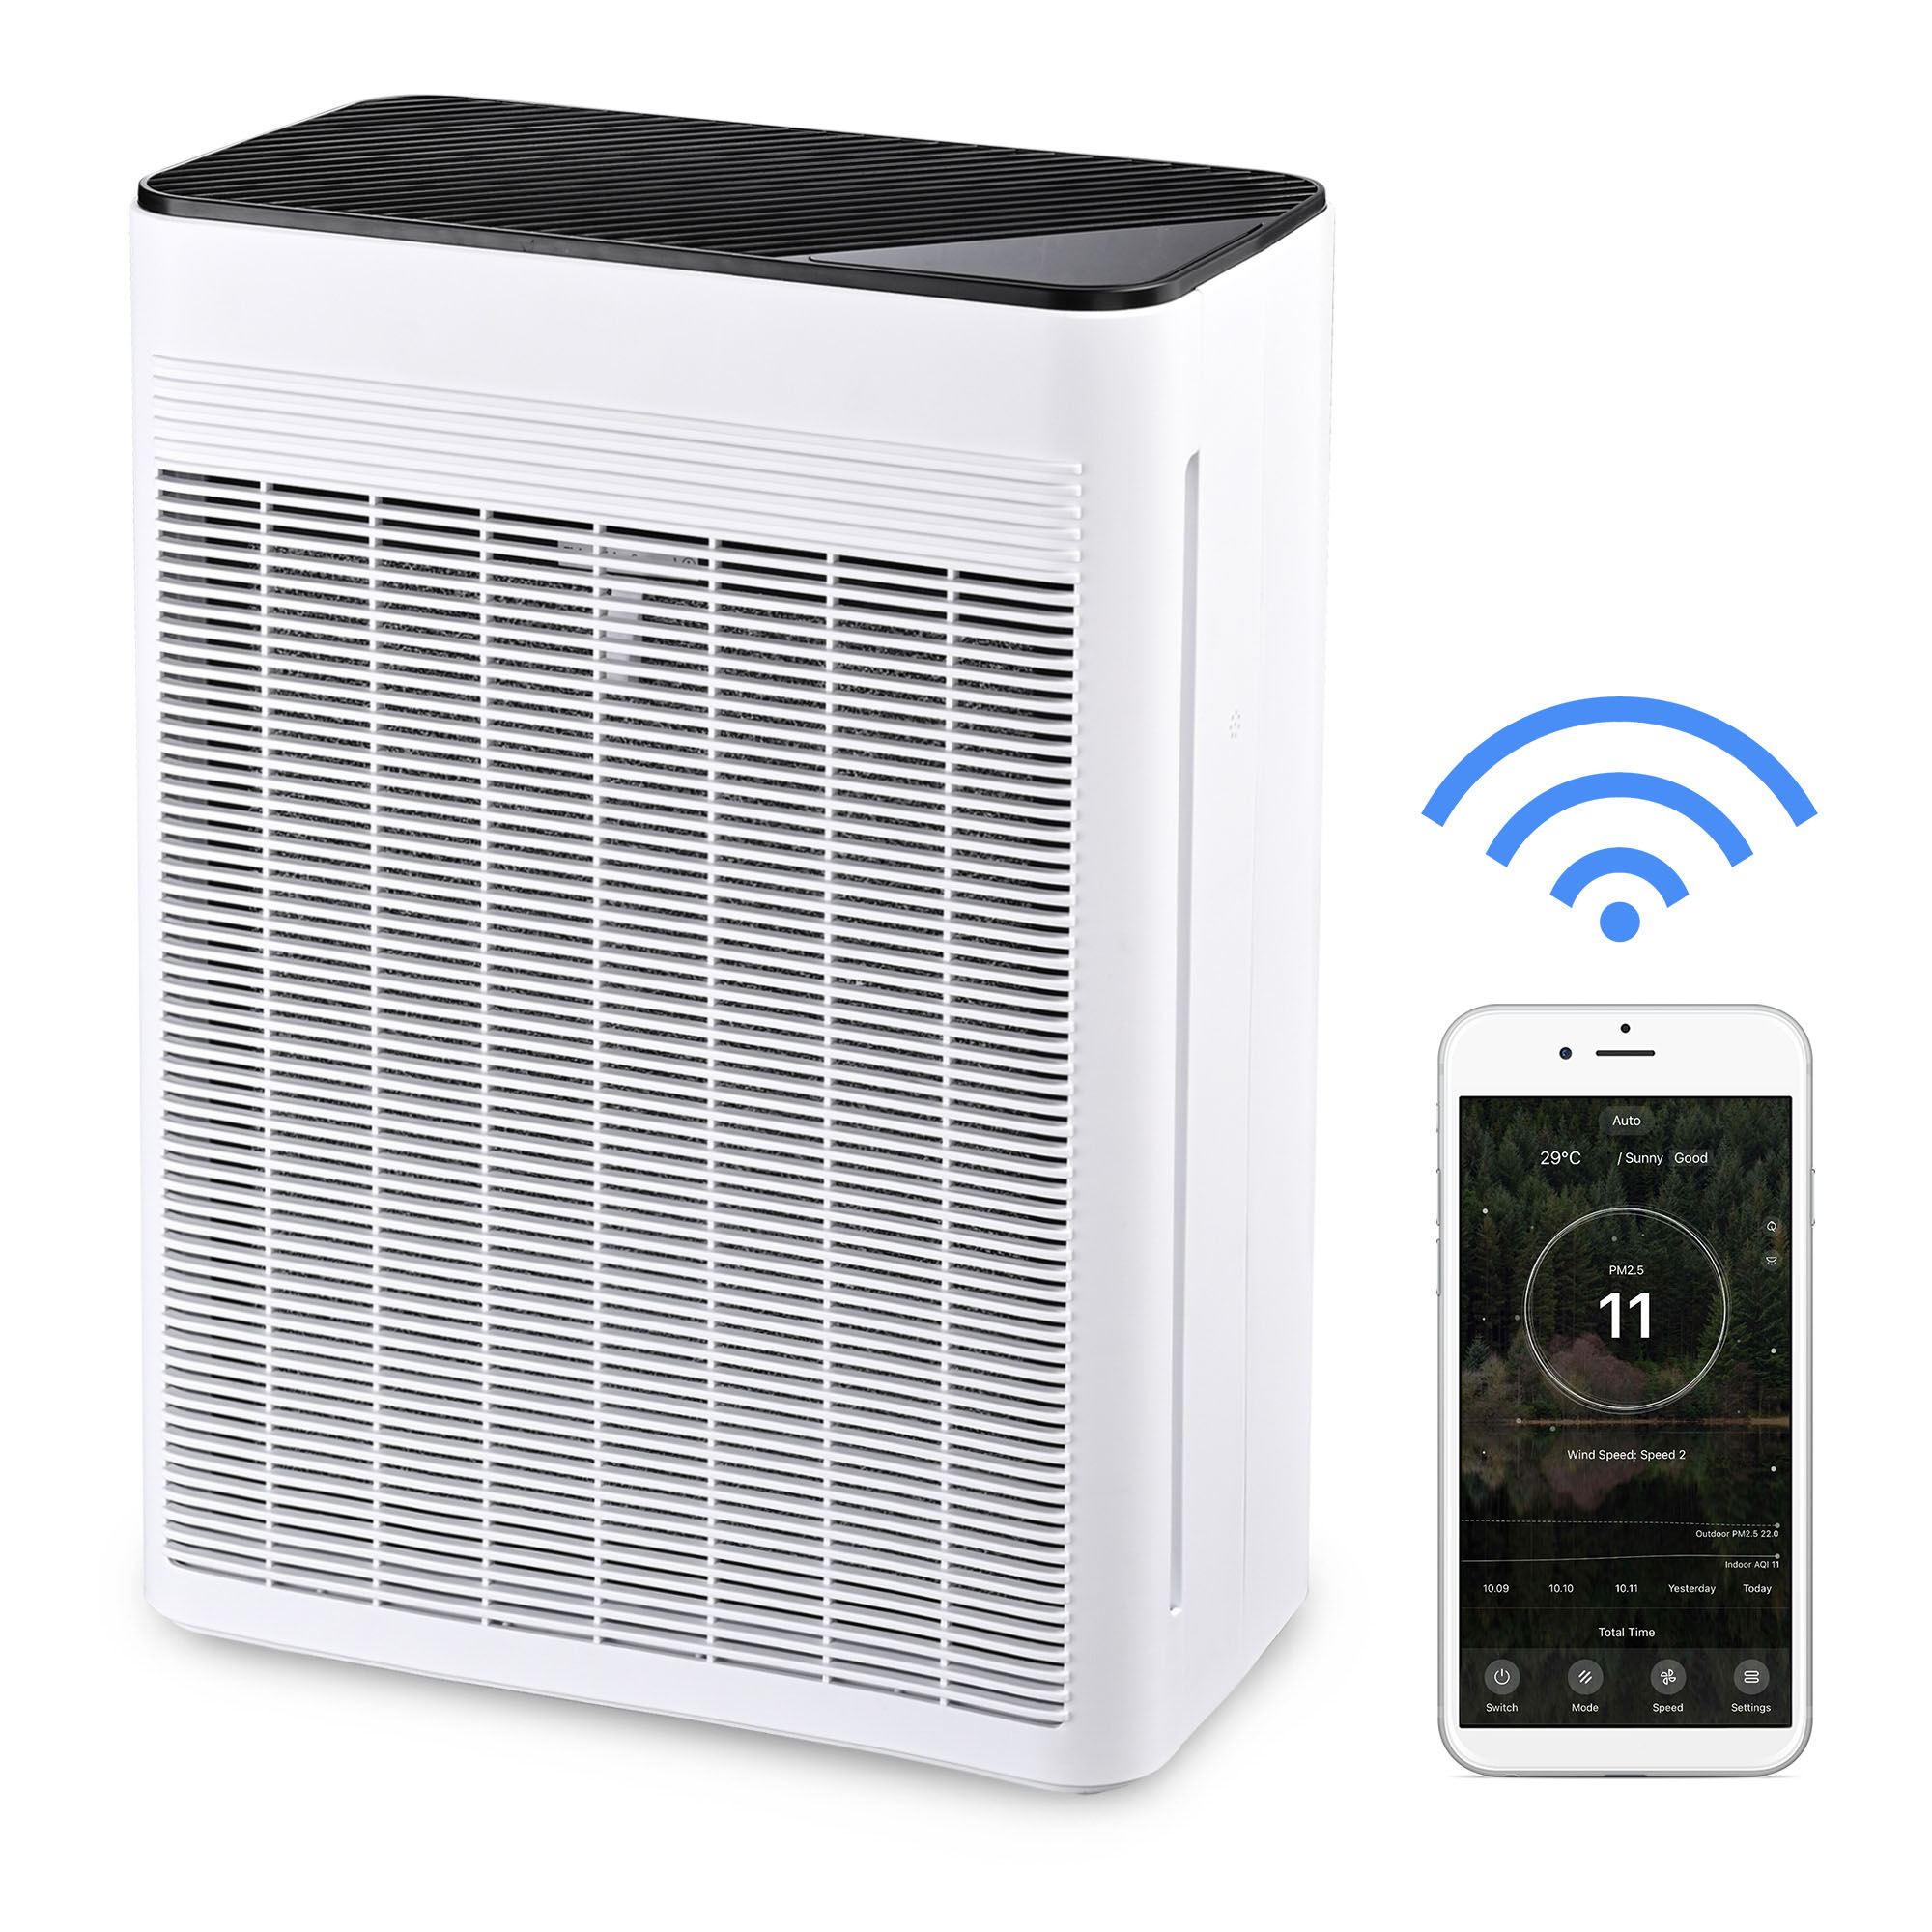 Yescom 5-in-1 Air Purifier for Large Room Up to 1000 Sq Ft Coverage with Smart WiFi H13 True HEPA Filter for Home Allergies Pet